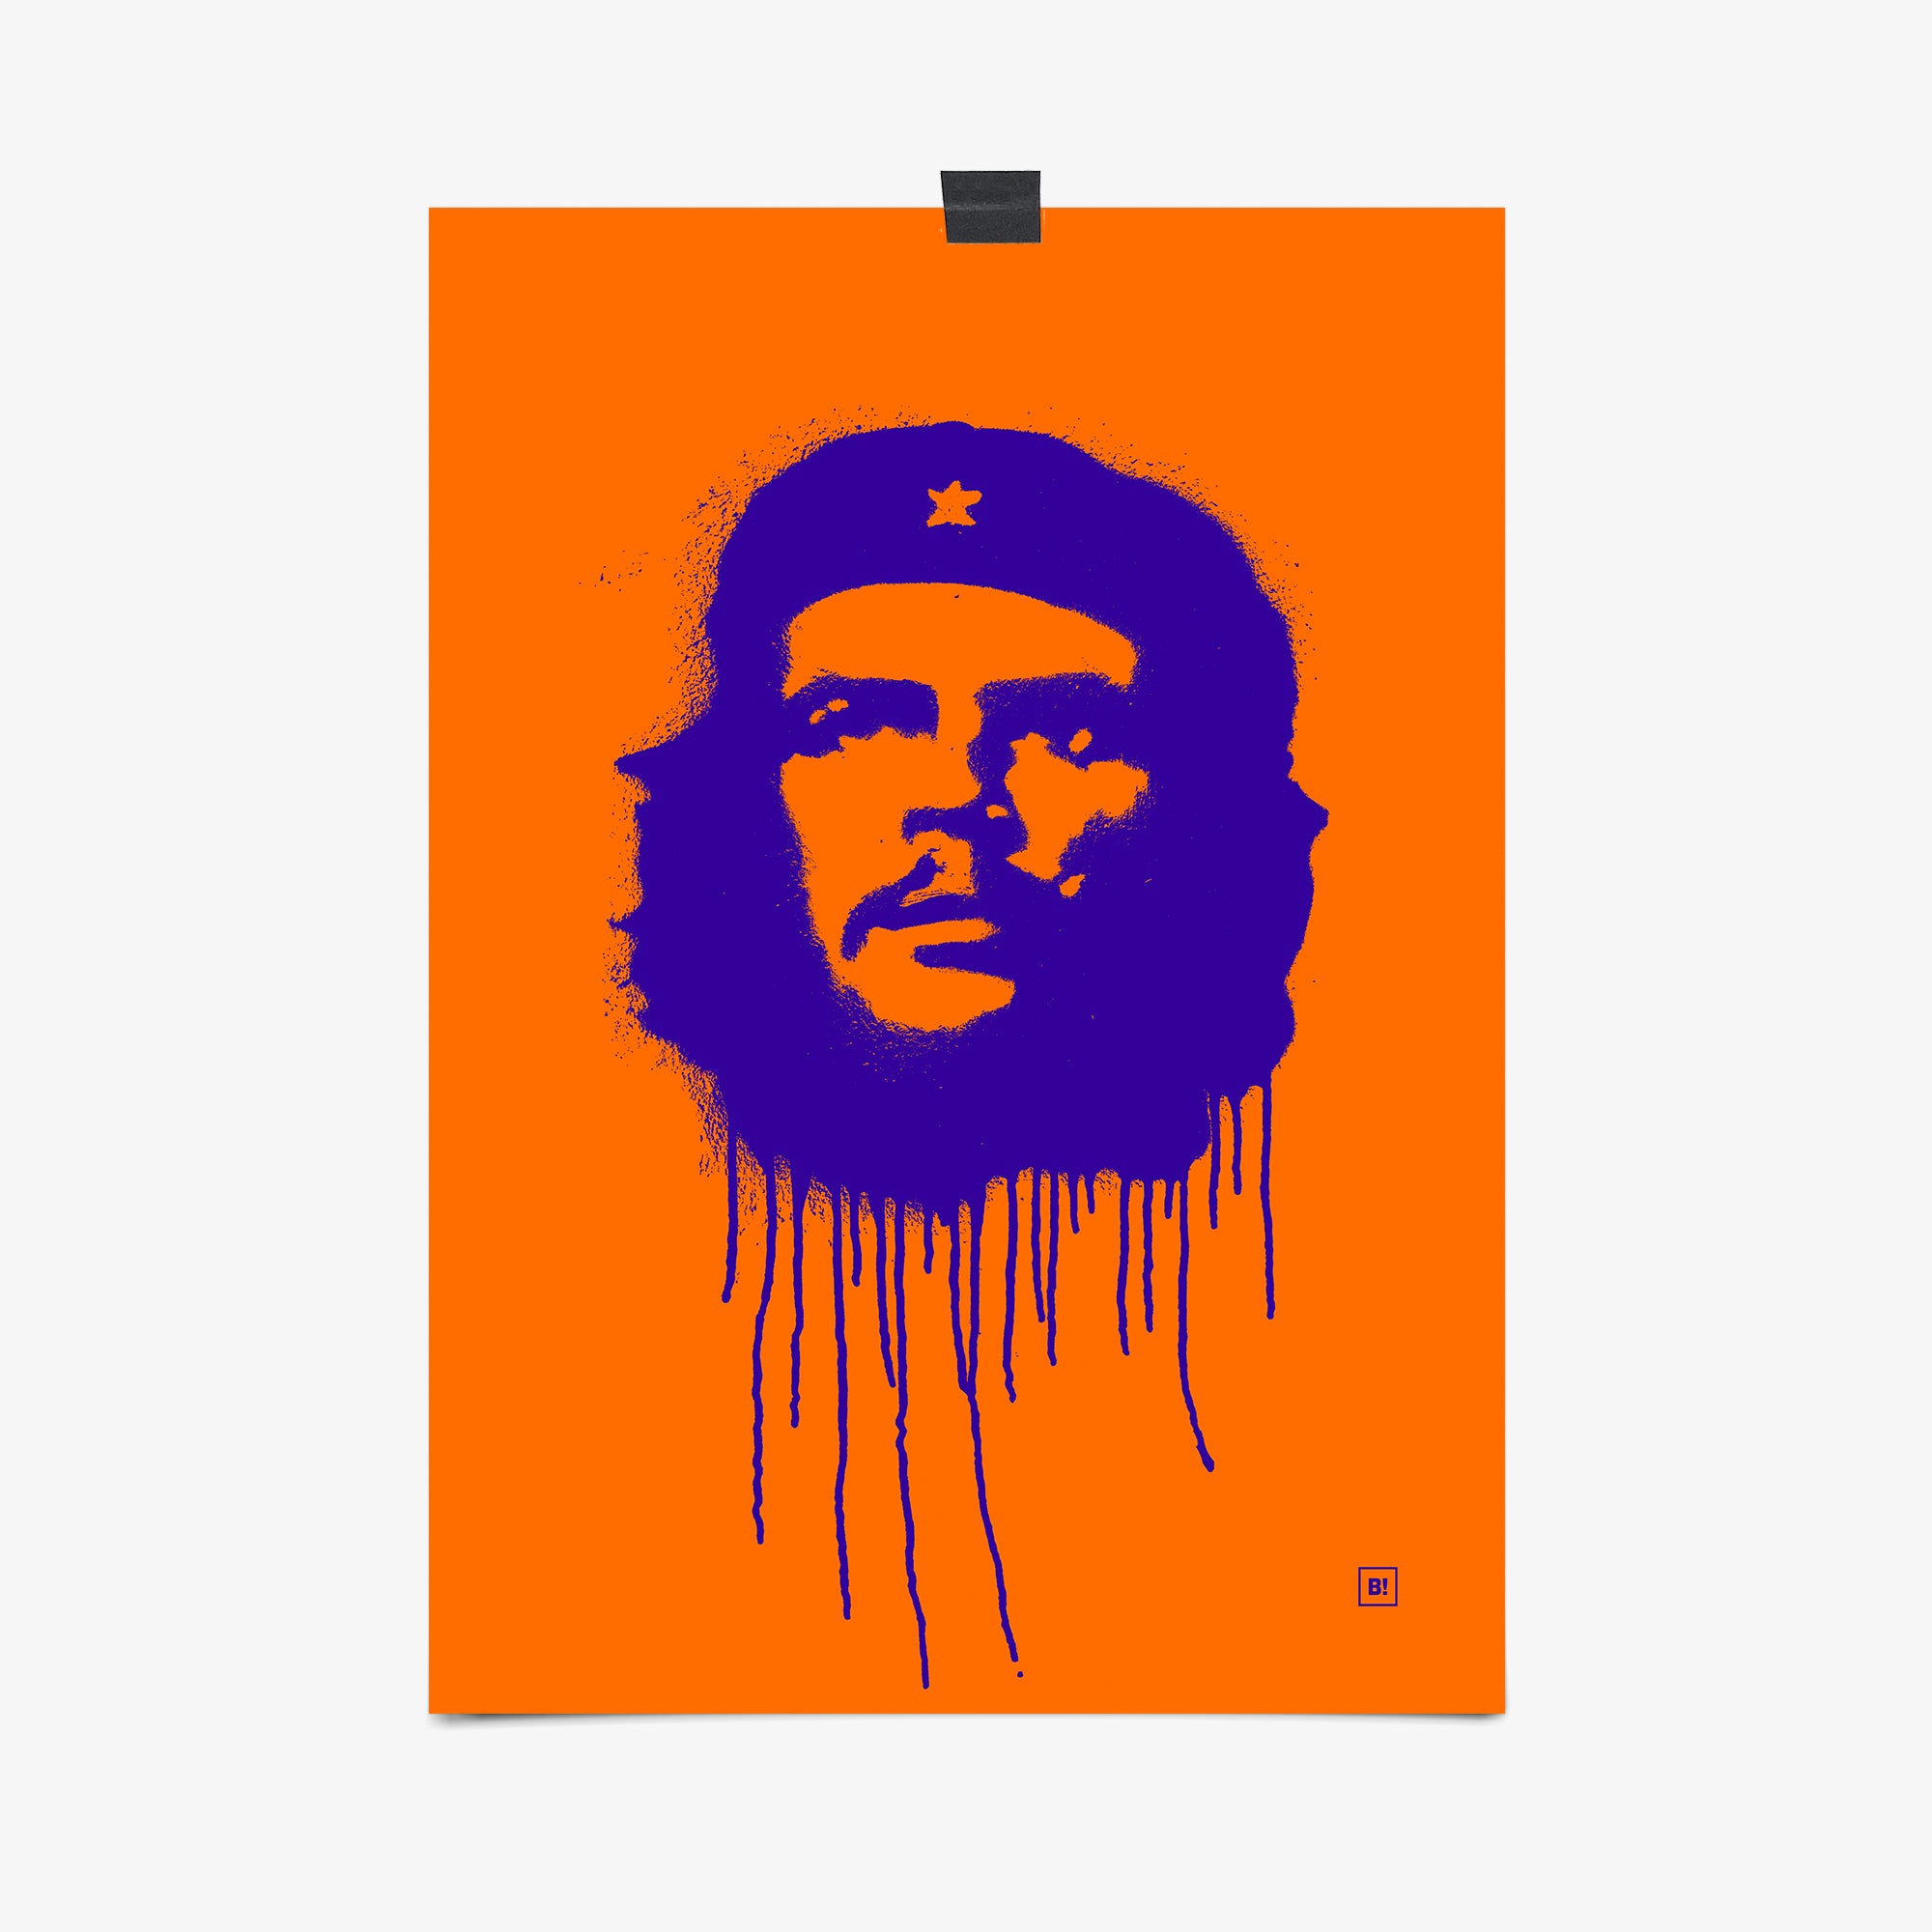 Be inspired by our pop navy "Ernesto Che Guevara" art print! This artwork was printed using the giclée process on archival acid-free paper, capturing its timeless beauty in every detail.